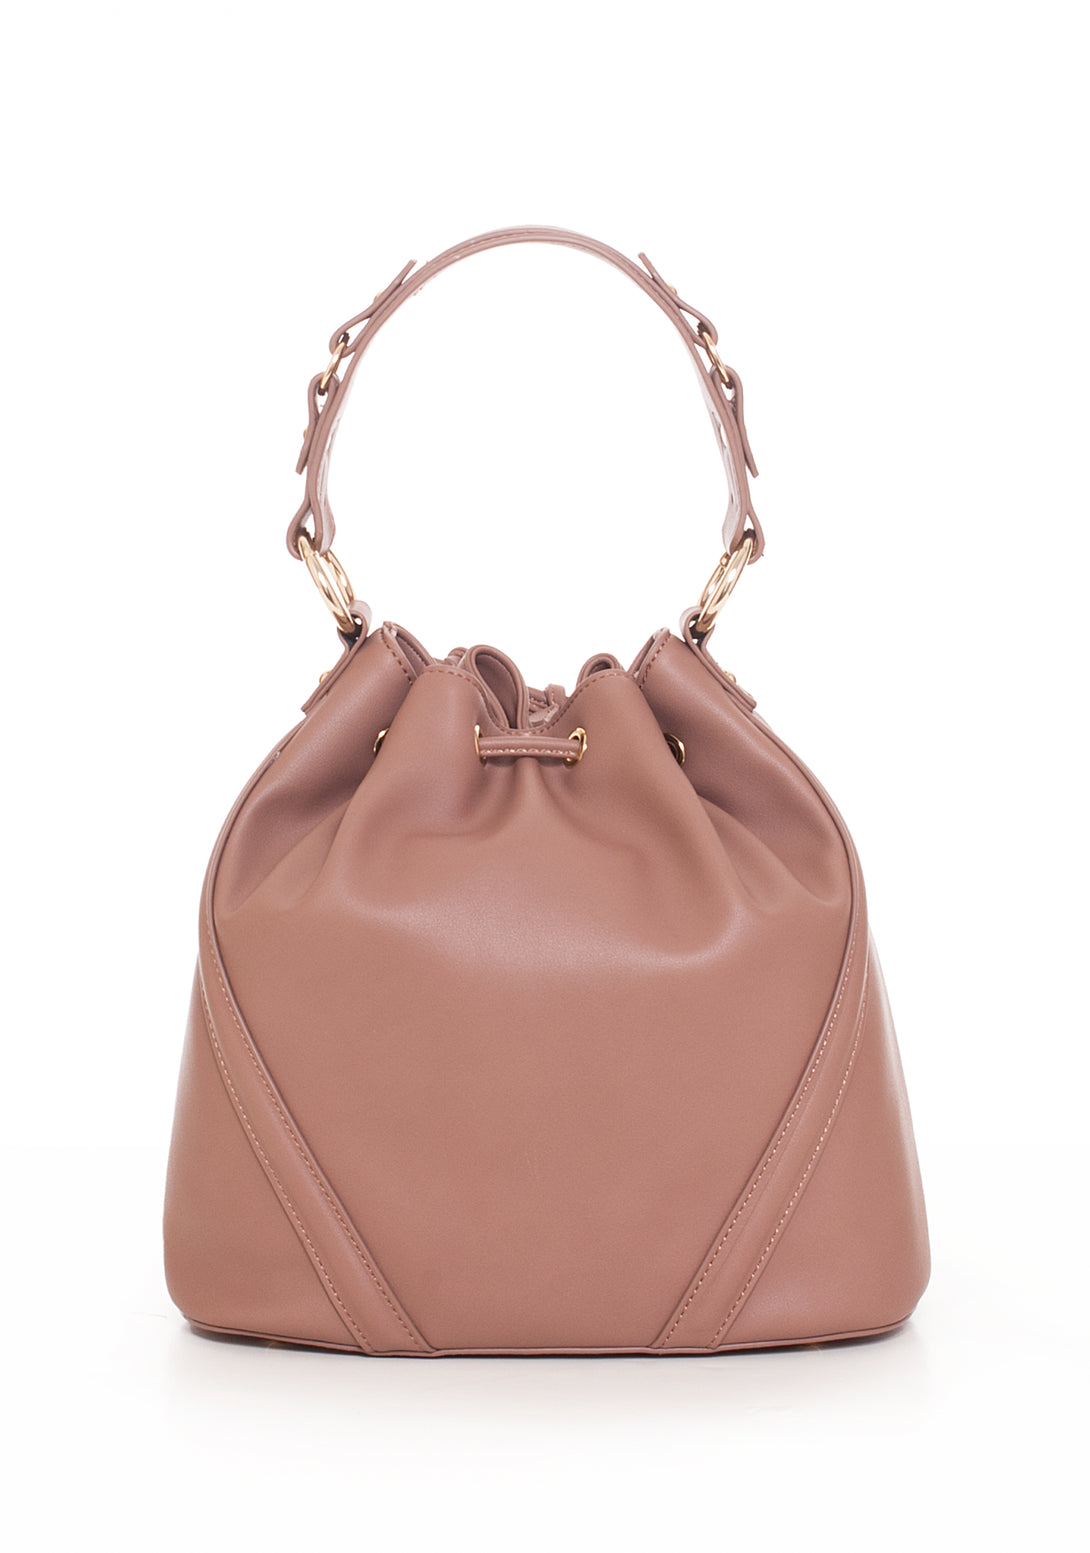 Bucket bag made in quilted eco leather